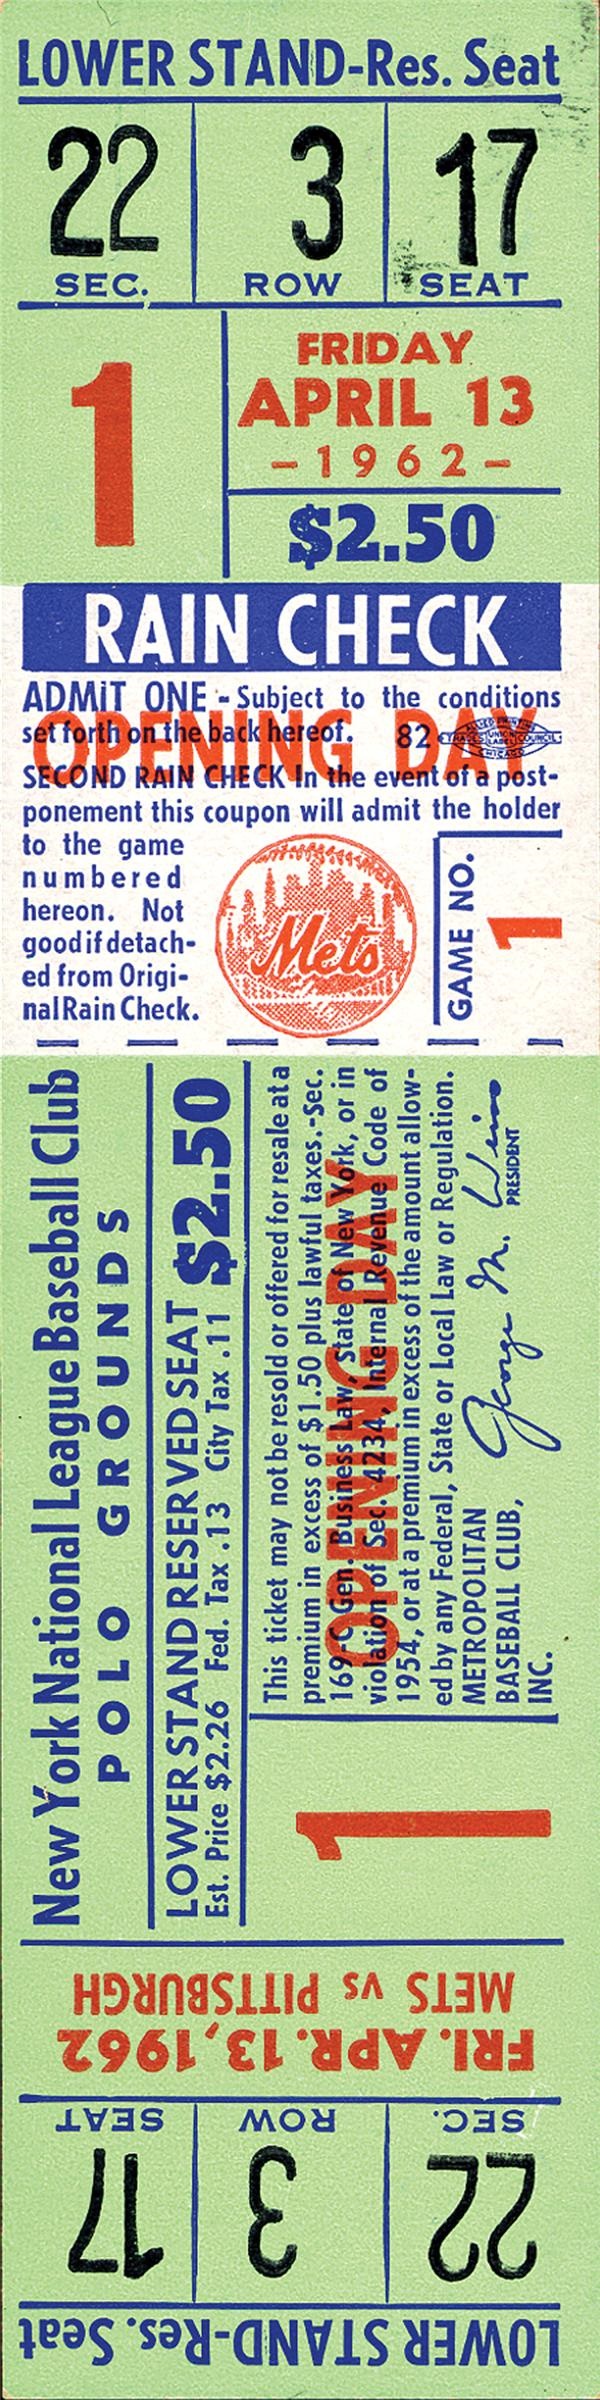 April 13, 1962 New York Mets First Home Game Full Ticket